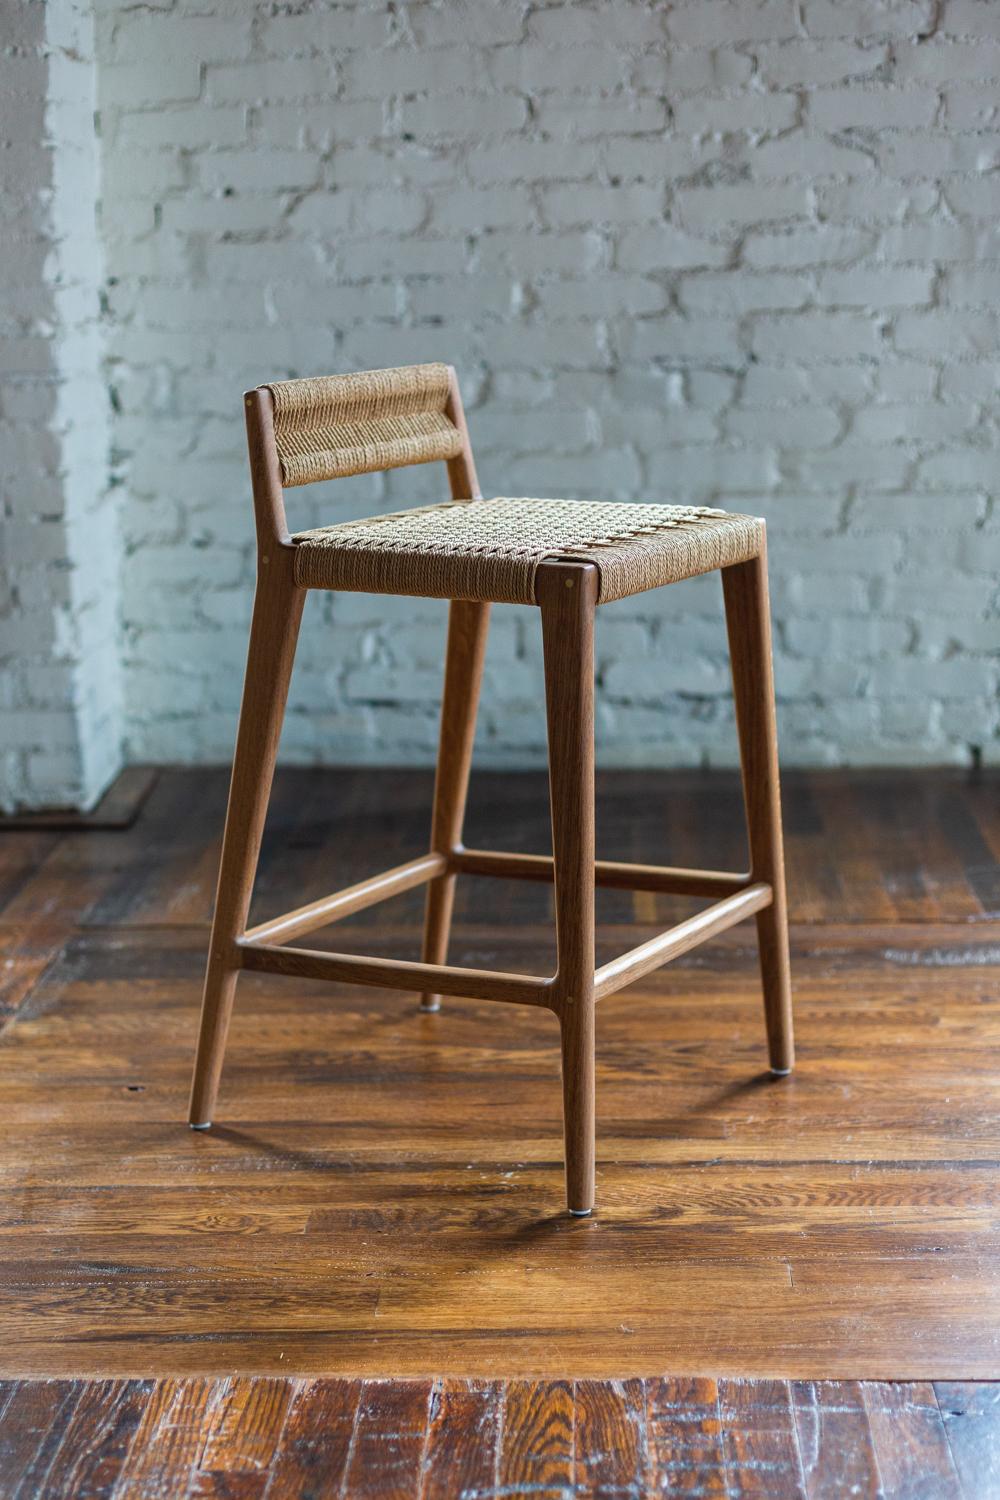 Clean, modern angles complimented by the warm texture of the Danish cord. The Travis stool can be made counter-height or bar-height with any of the dimensions customizable.

Designed, built, finished, and woven from start to finish in our studio.